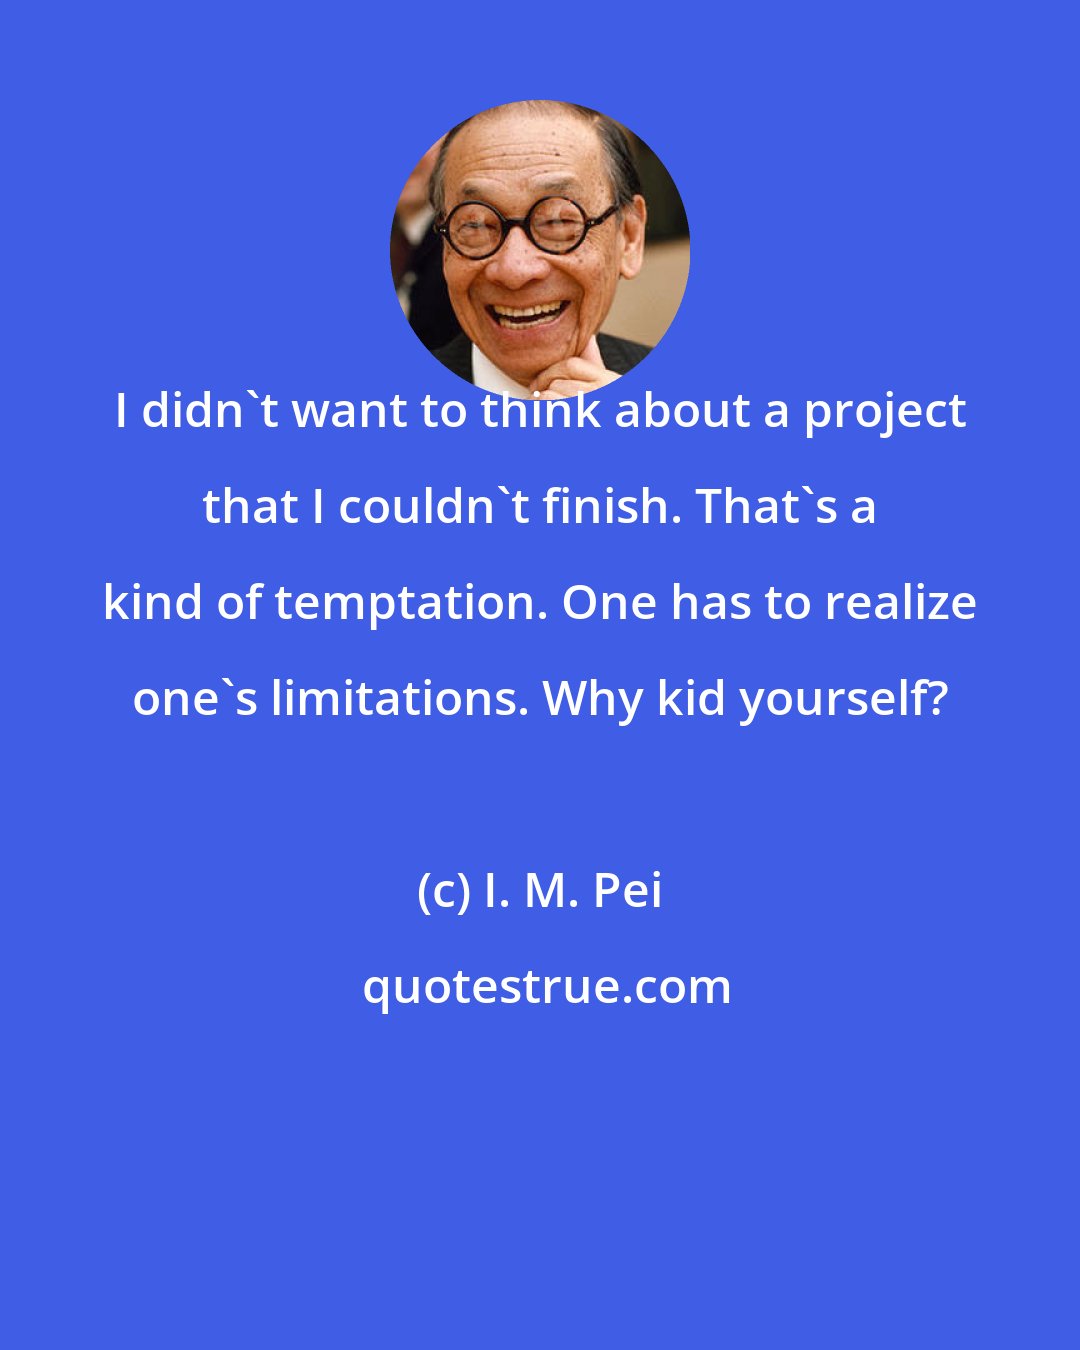 I. M. Pei: I didn't want to think about a project that I couldn't finish. That's a kind of temptation. One has to realize one's limitations. Why kid yourself? ﻿